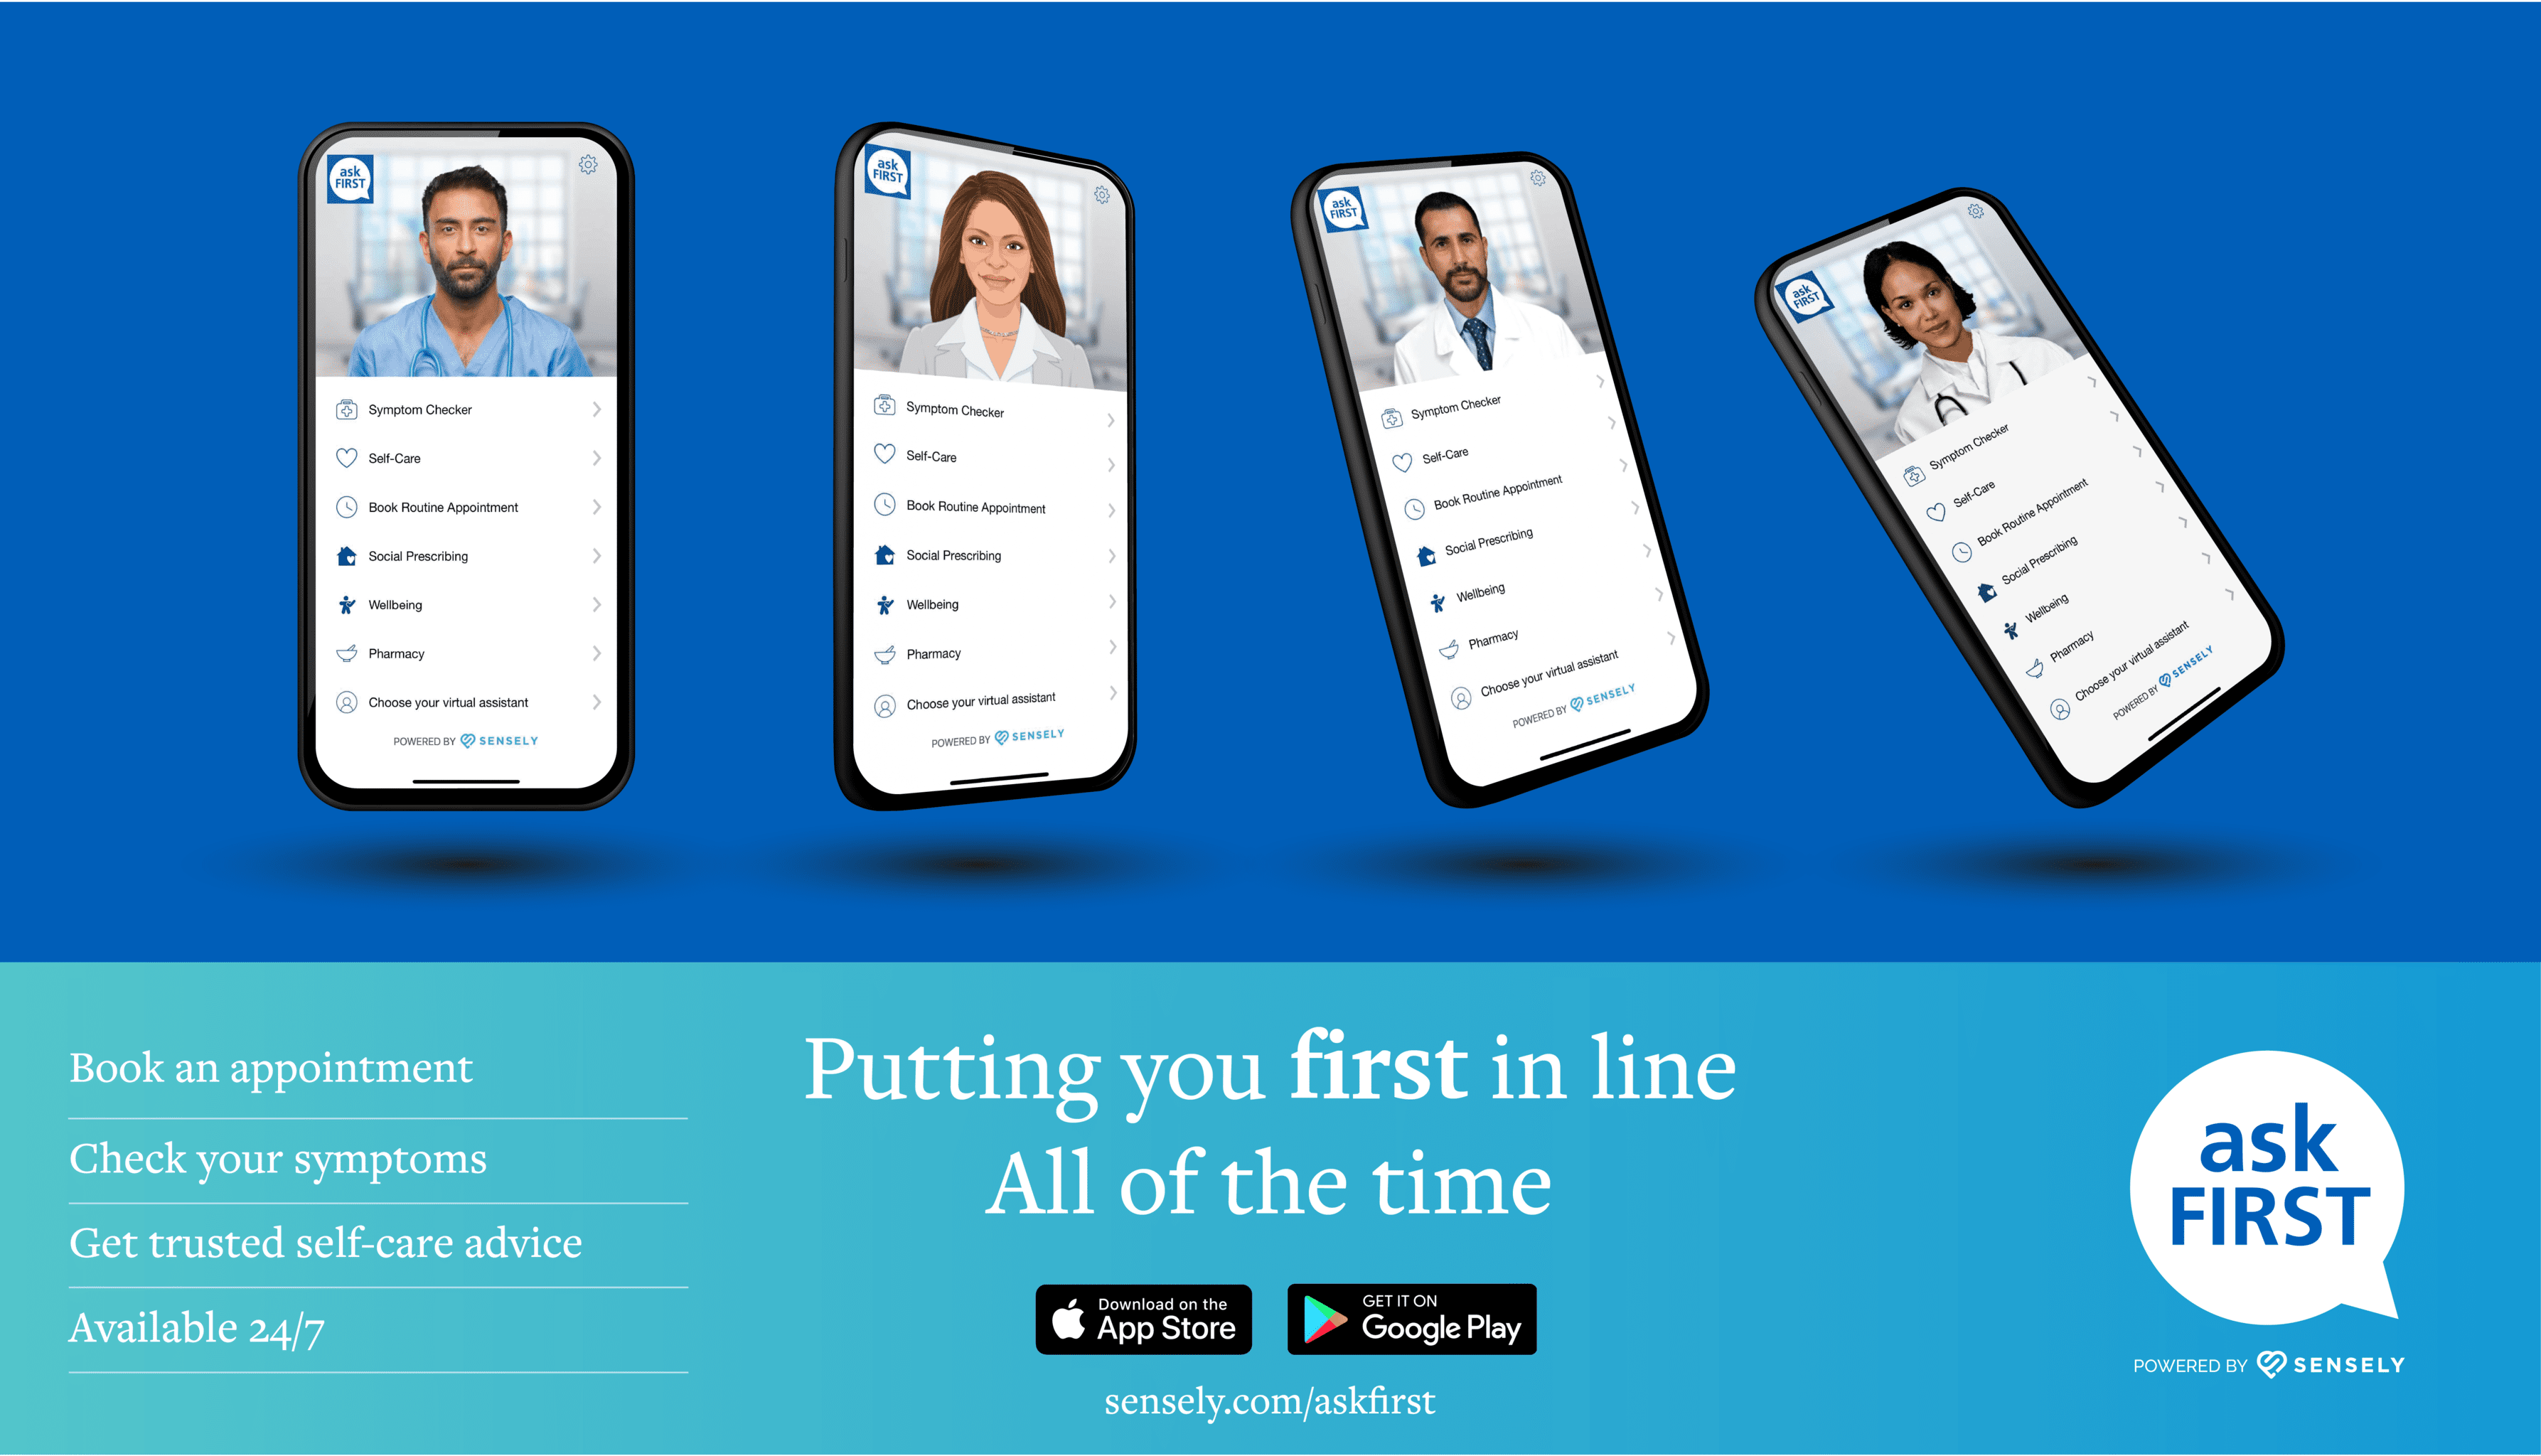 Book an appointment, Check your symptoms, Get trusted self-care advice, Available 24/7 — Putting you first in line all of the time — Ask First